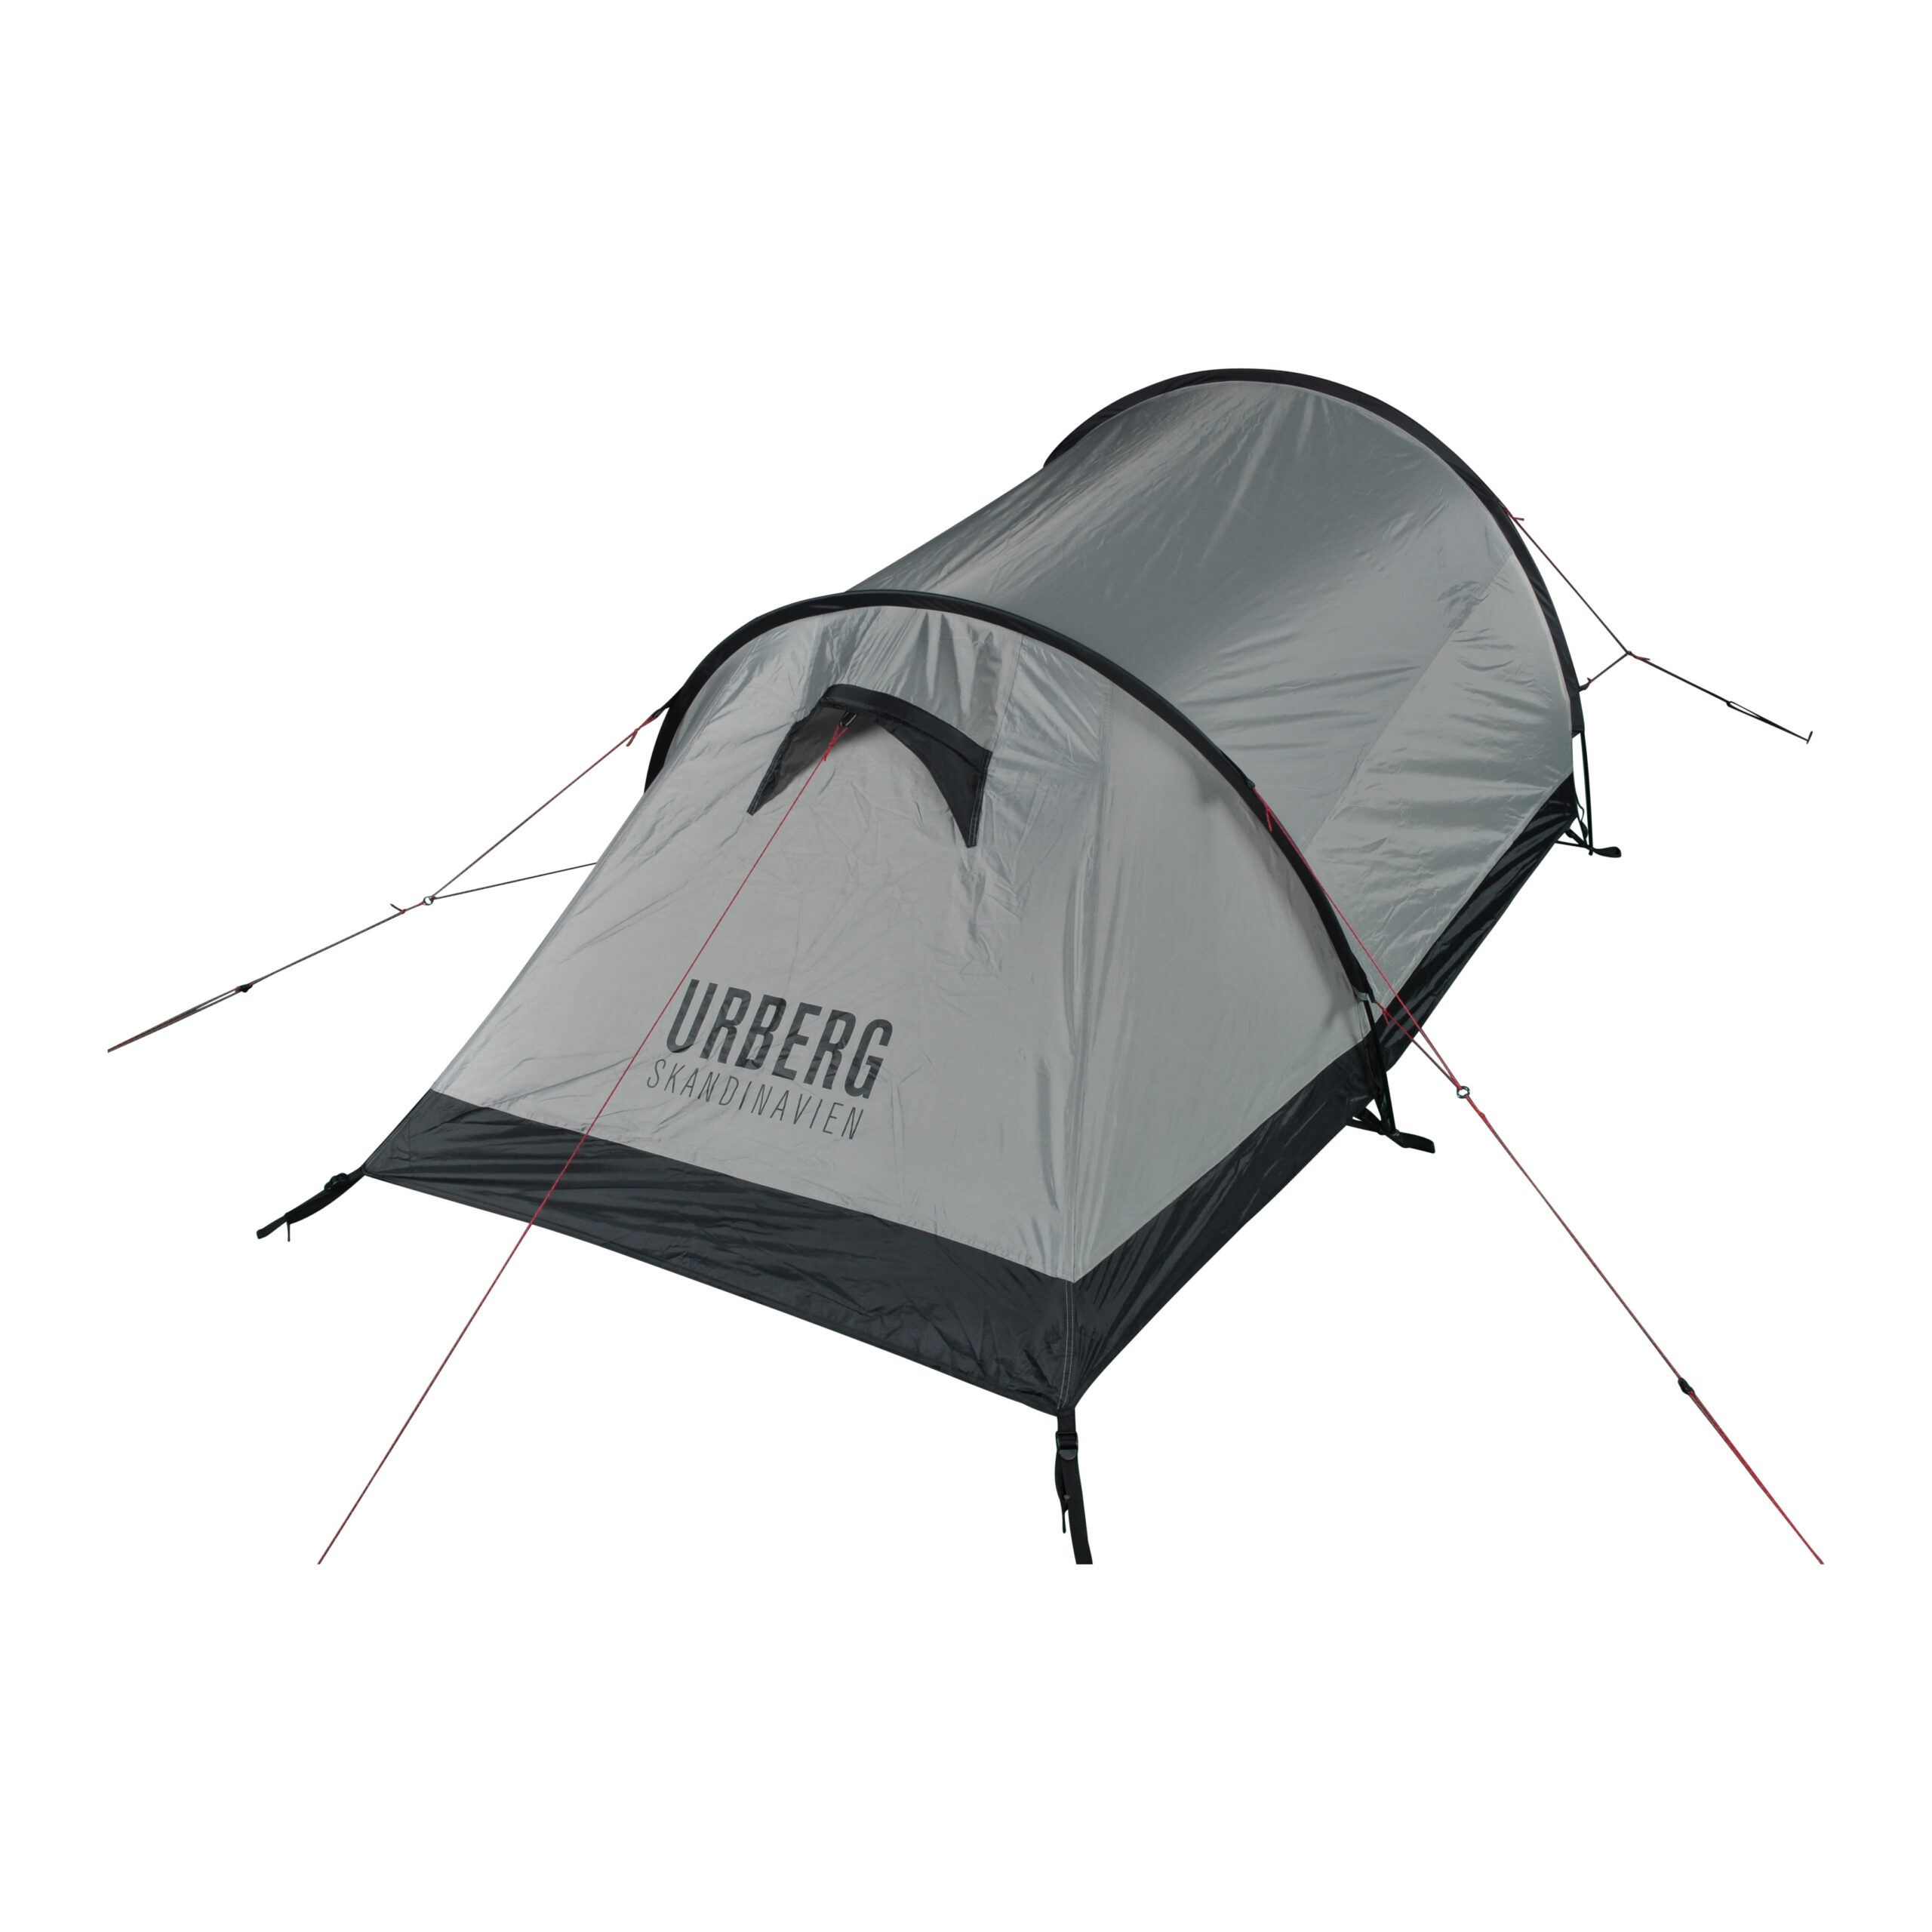 Urberg - 2-Person Tunnel Tent G4